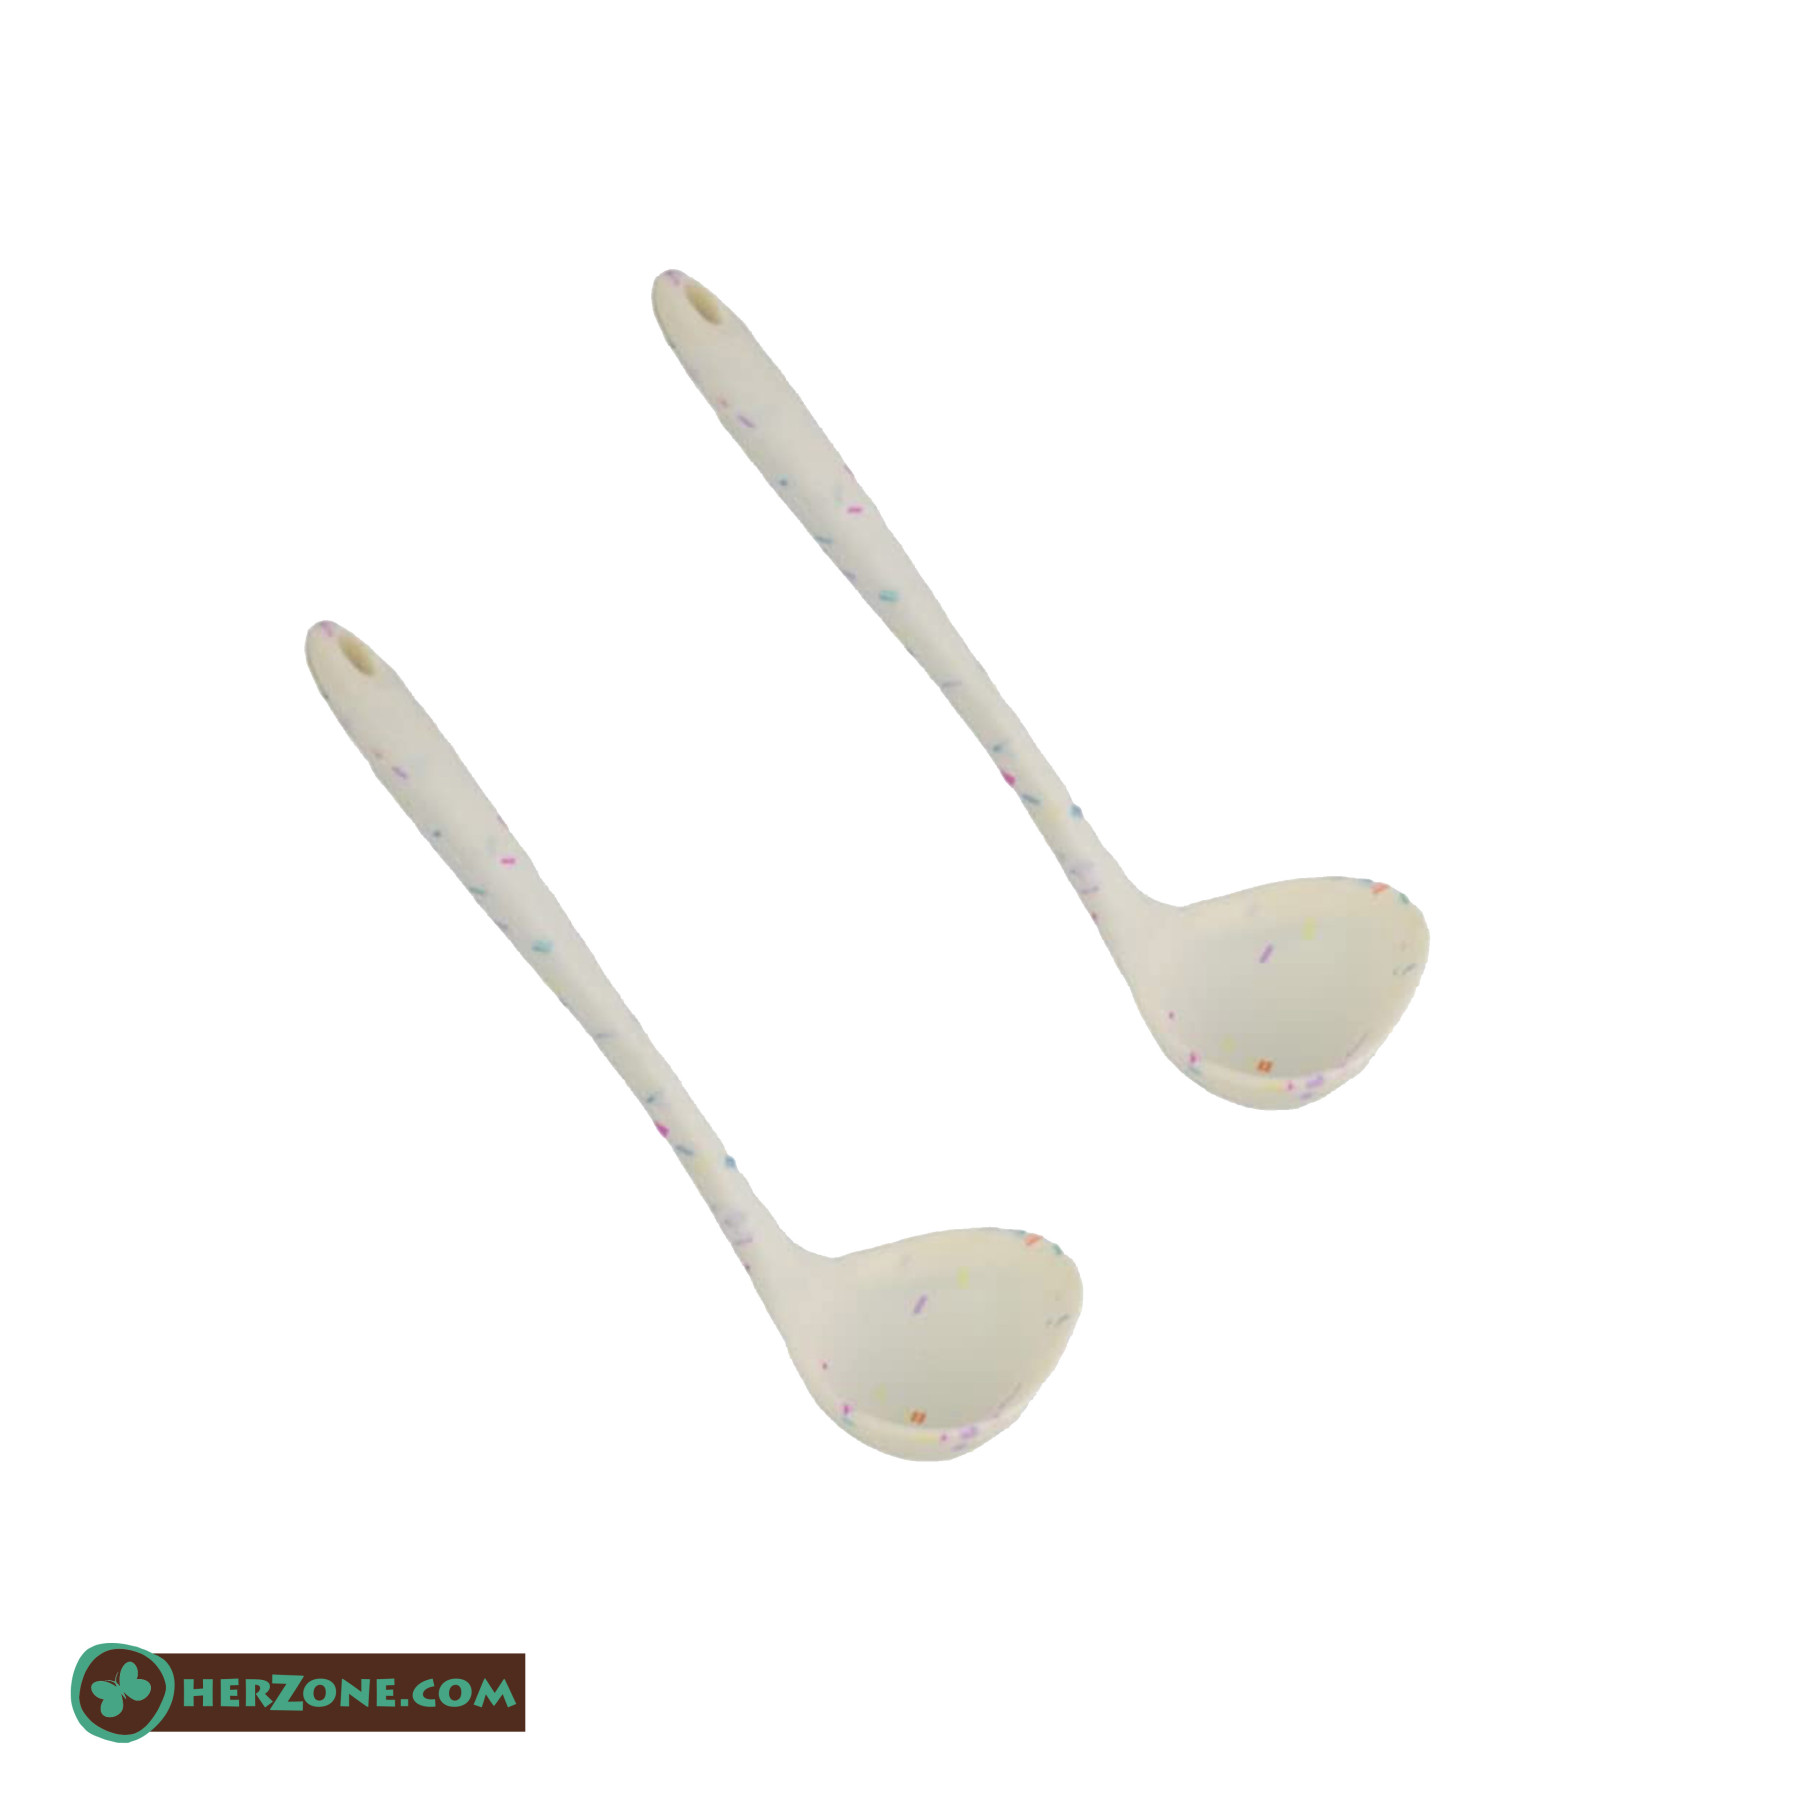 1 Piece of Silicone Soup Ladle